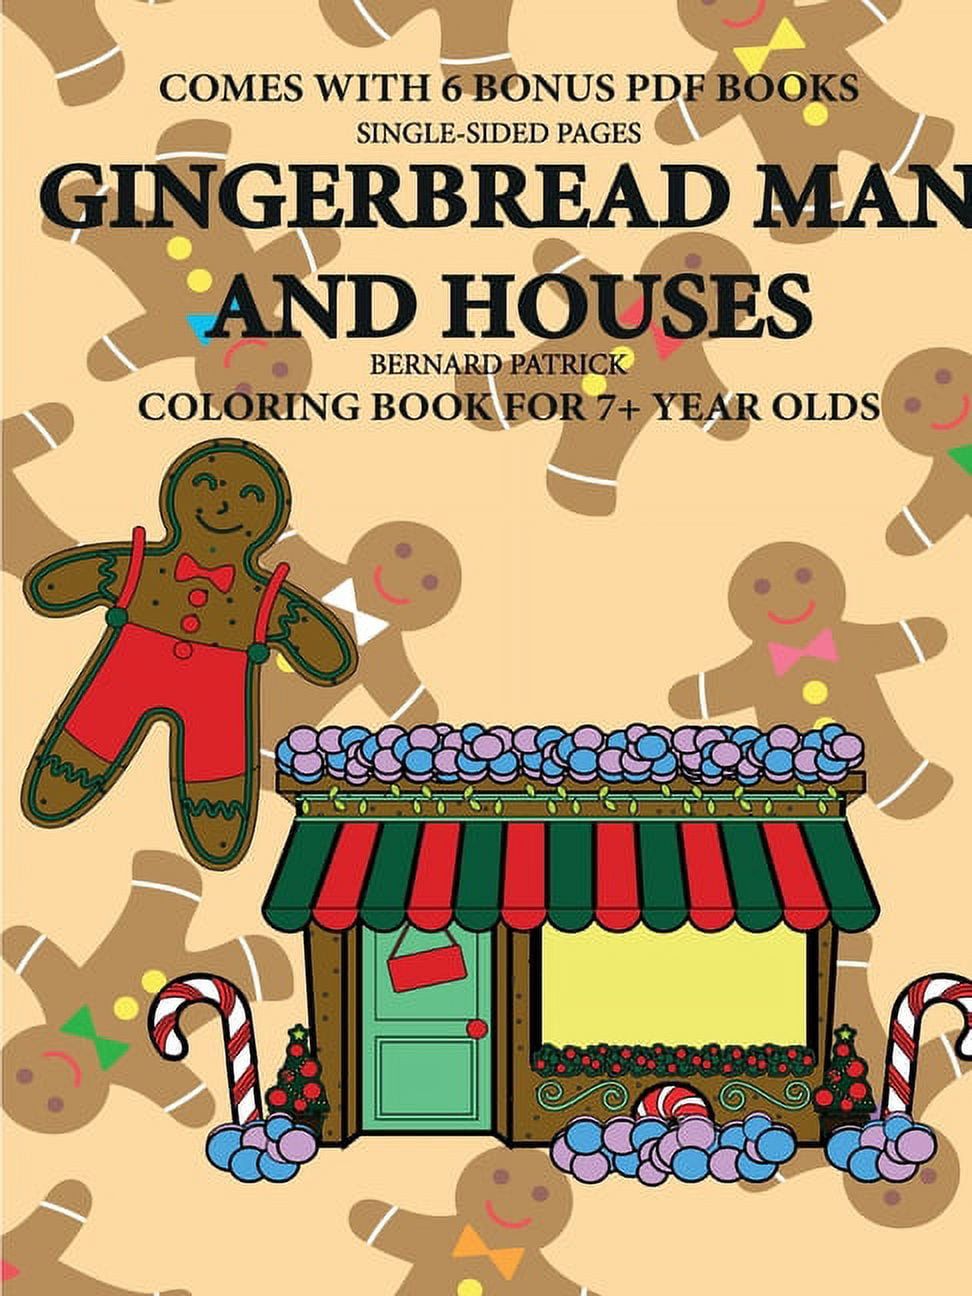 Coloring Book for 7+ Year Olds (Gingerbread Man and Houses